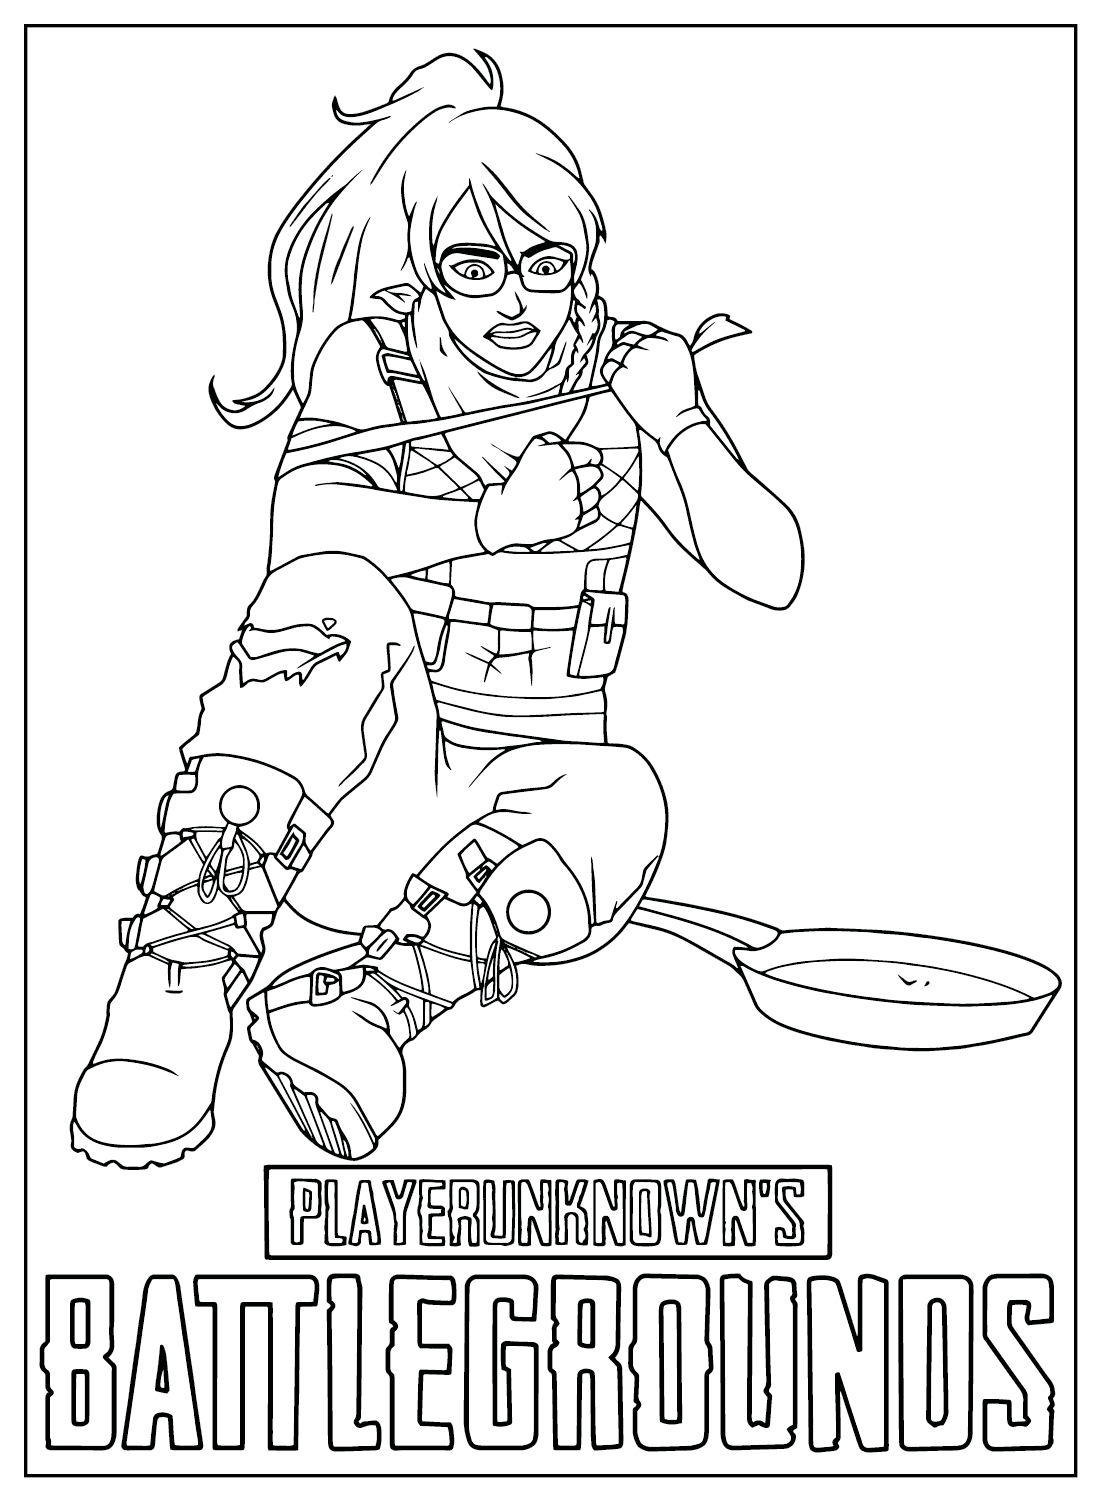 Free Pubg Battle Royale Coloring Page from PUBG